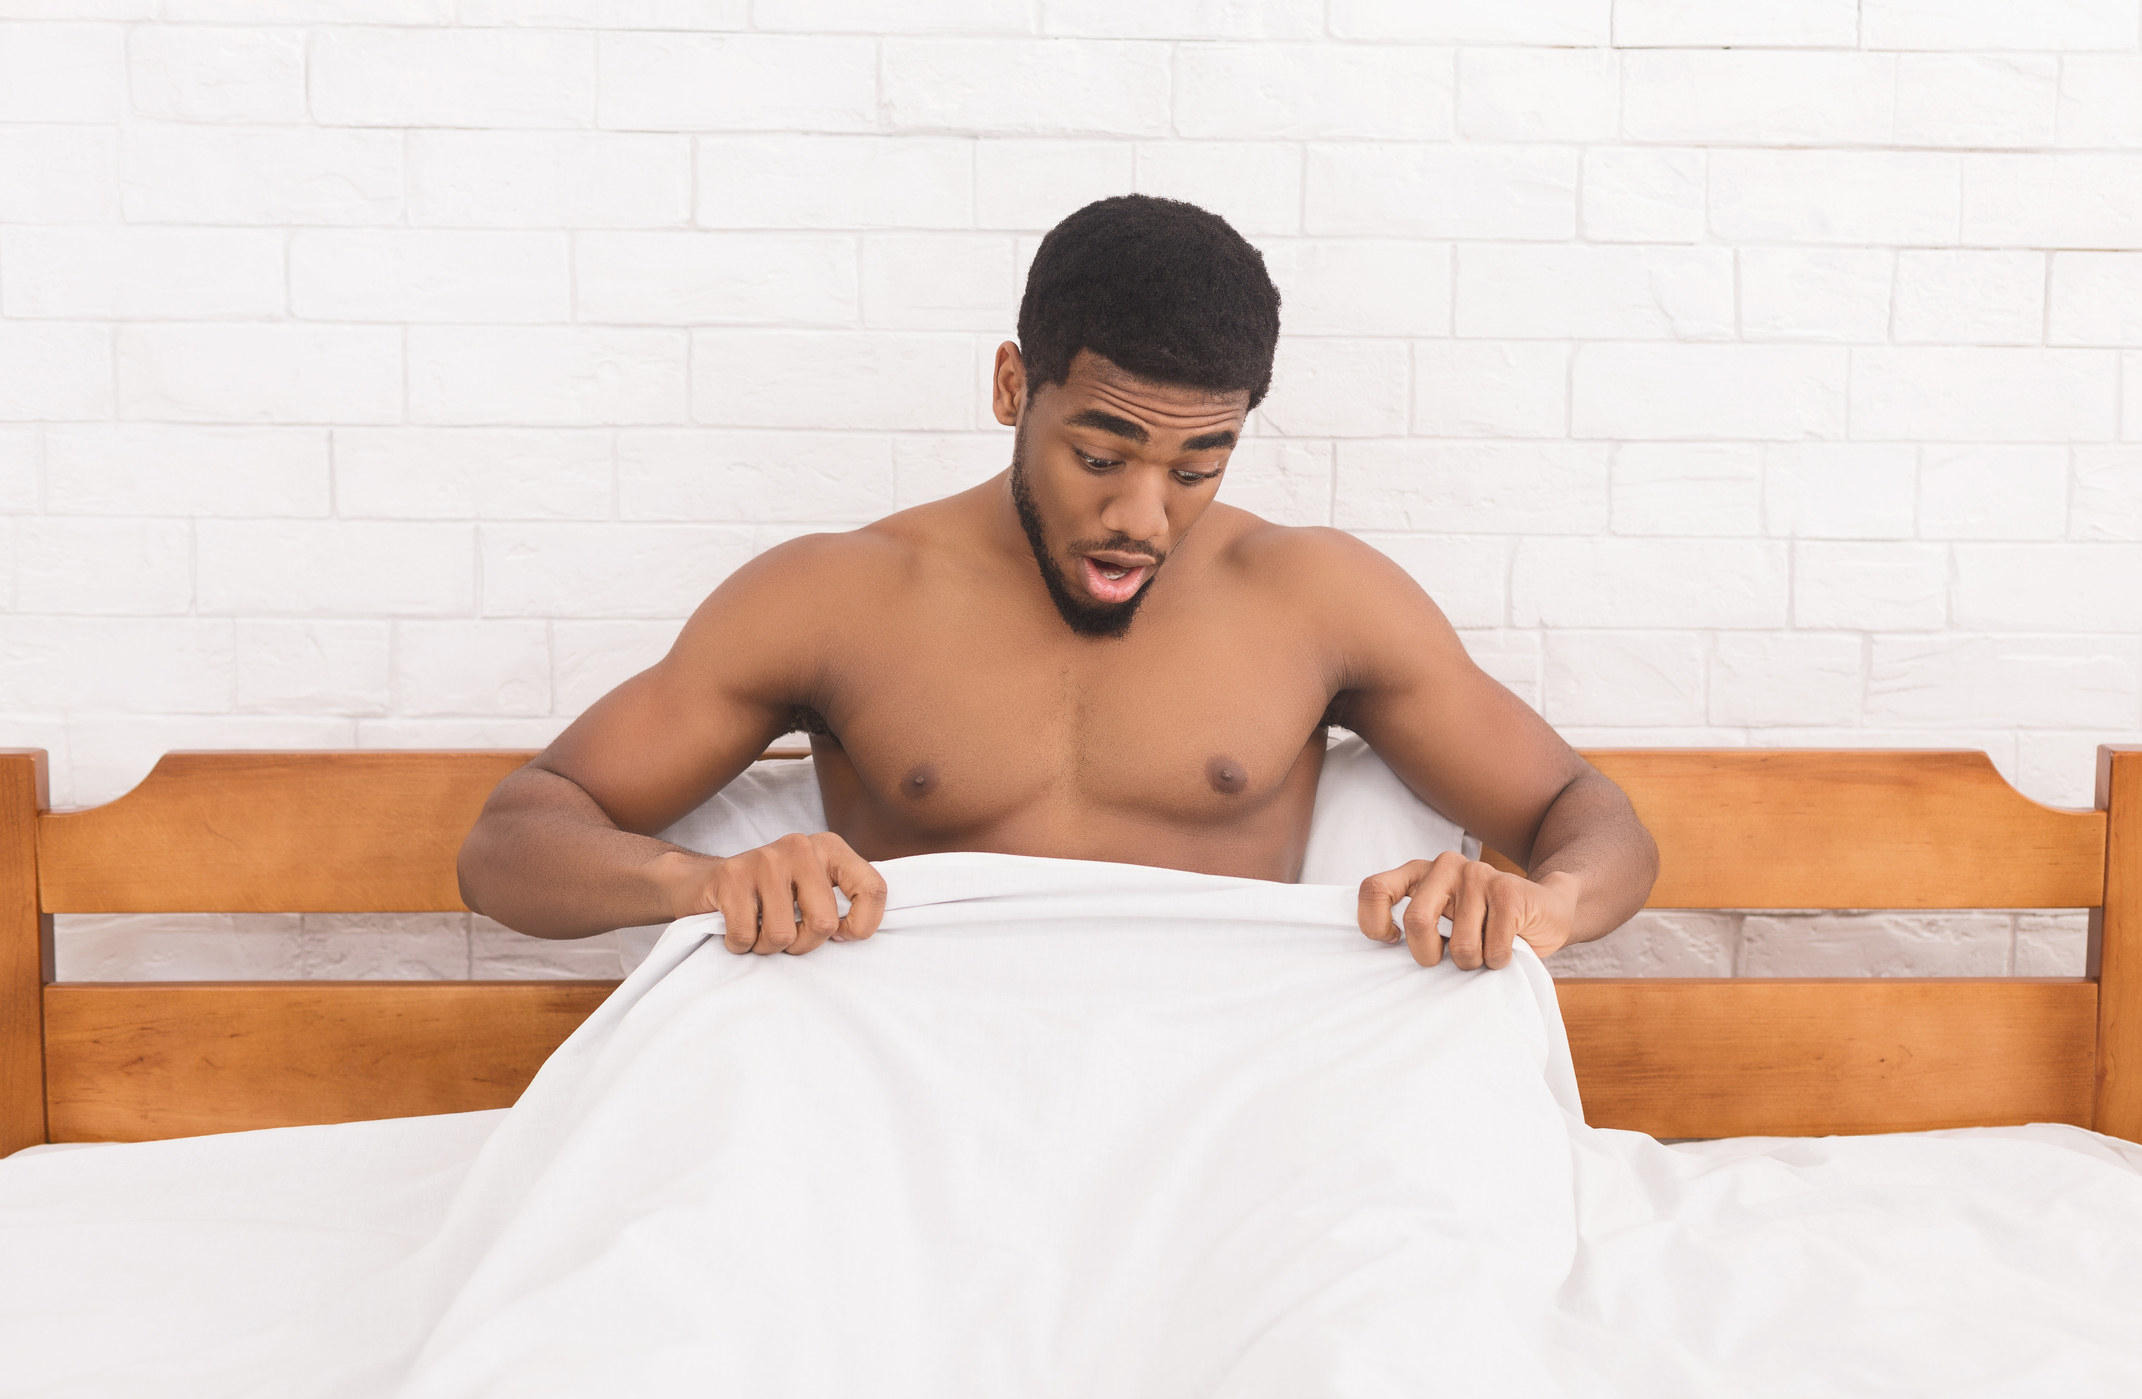 Man sitting up in bed and looking underneath the sheets at the bottom half of his body